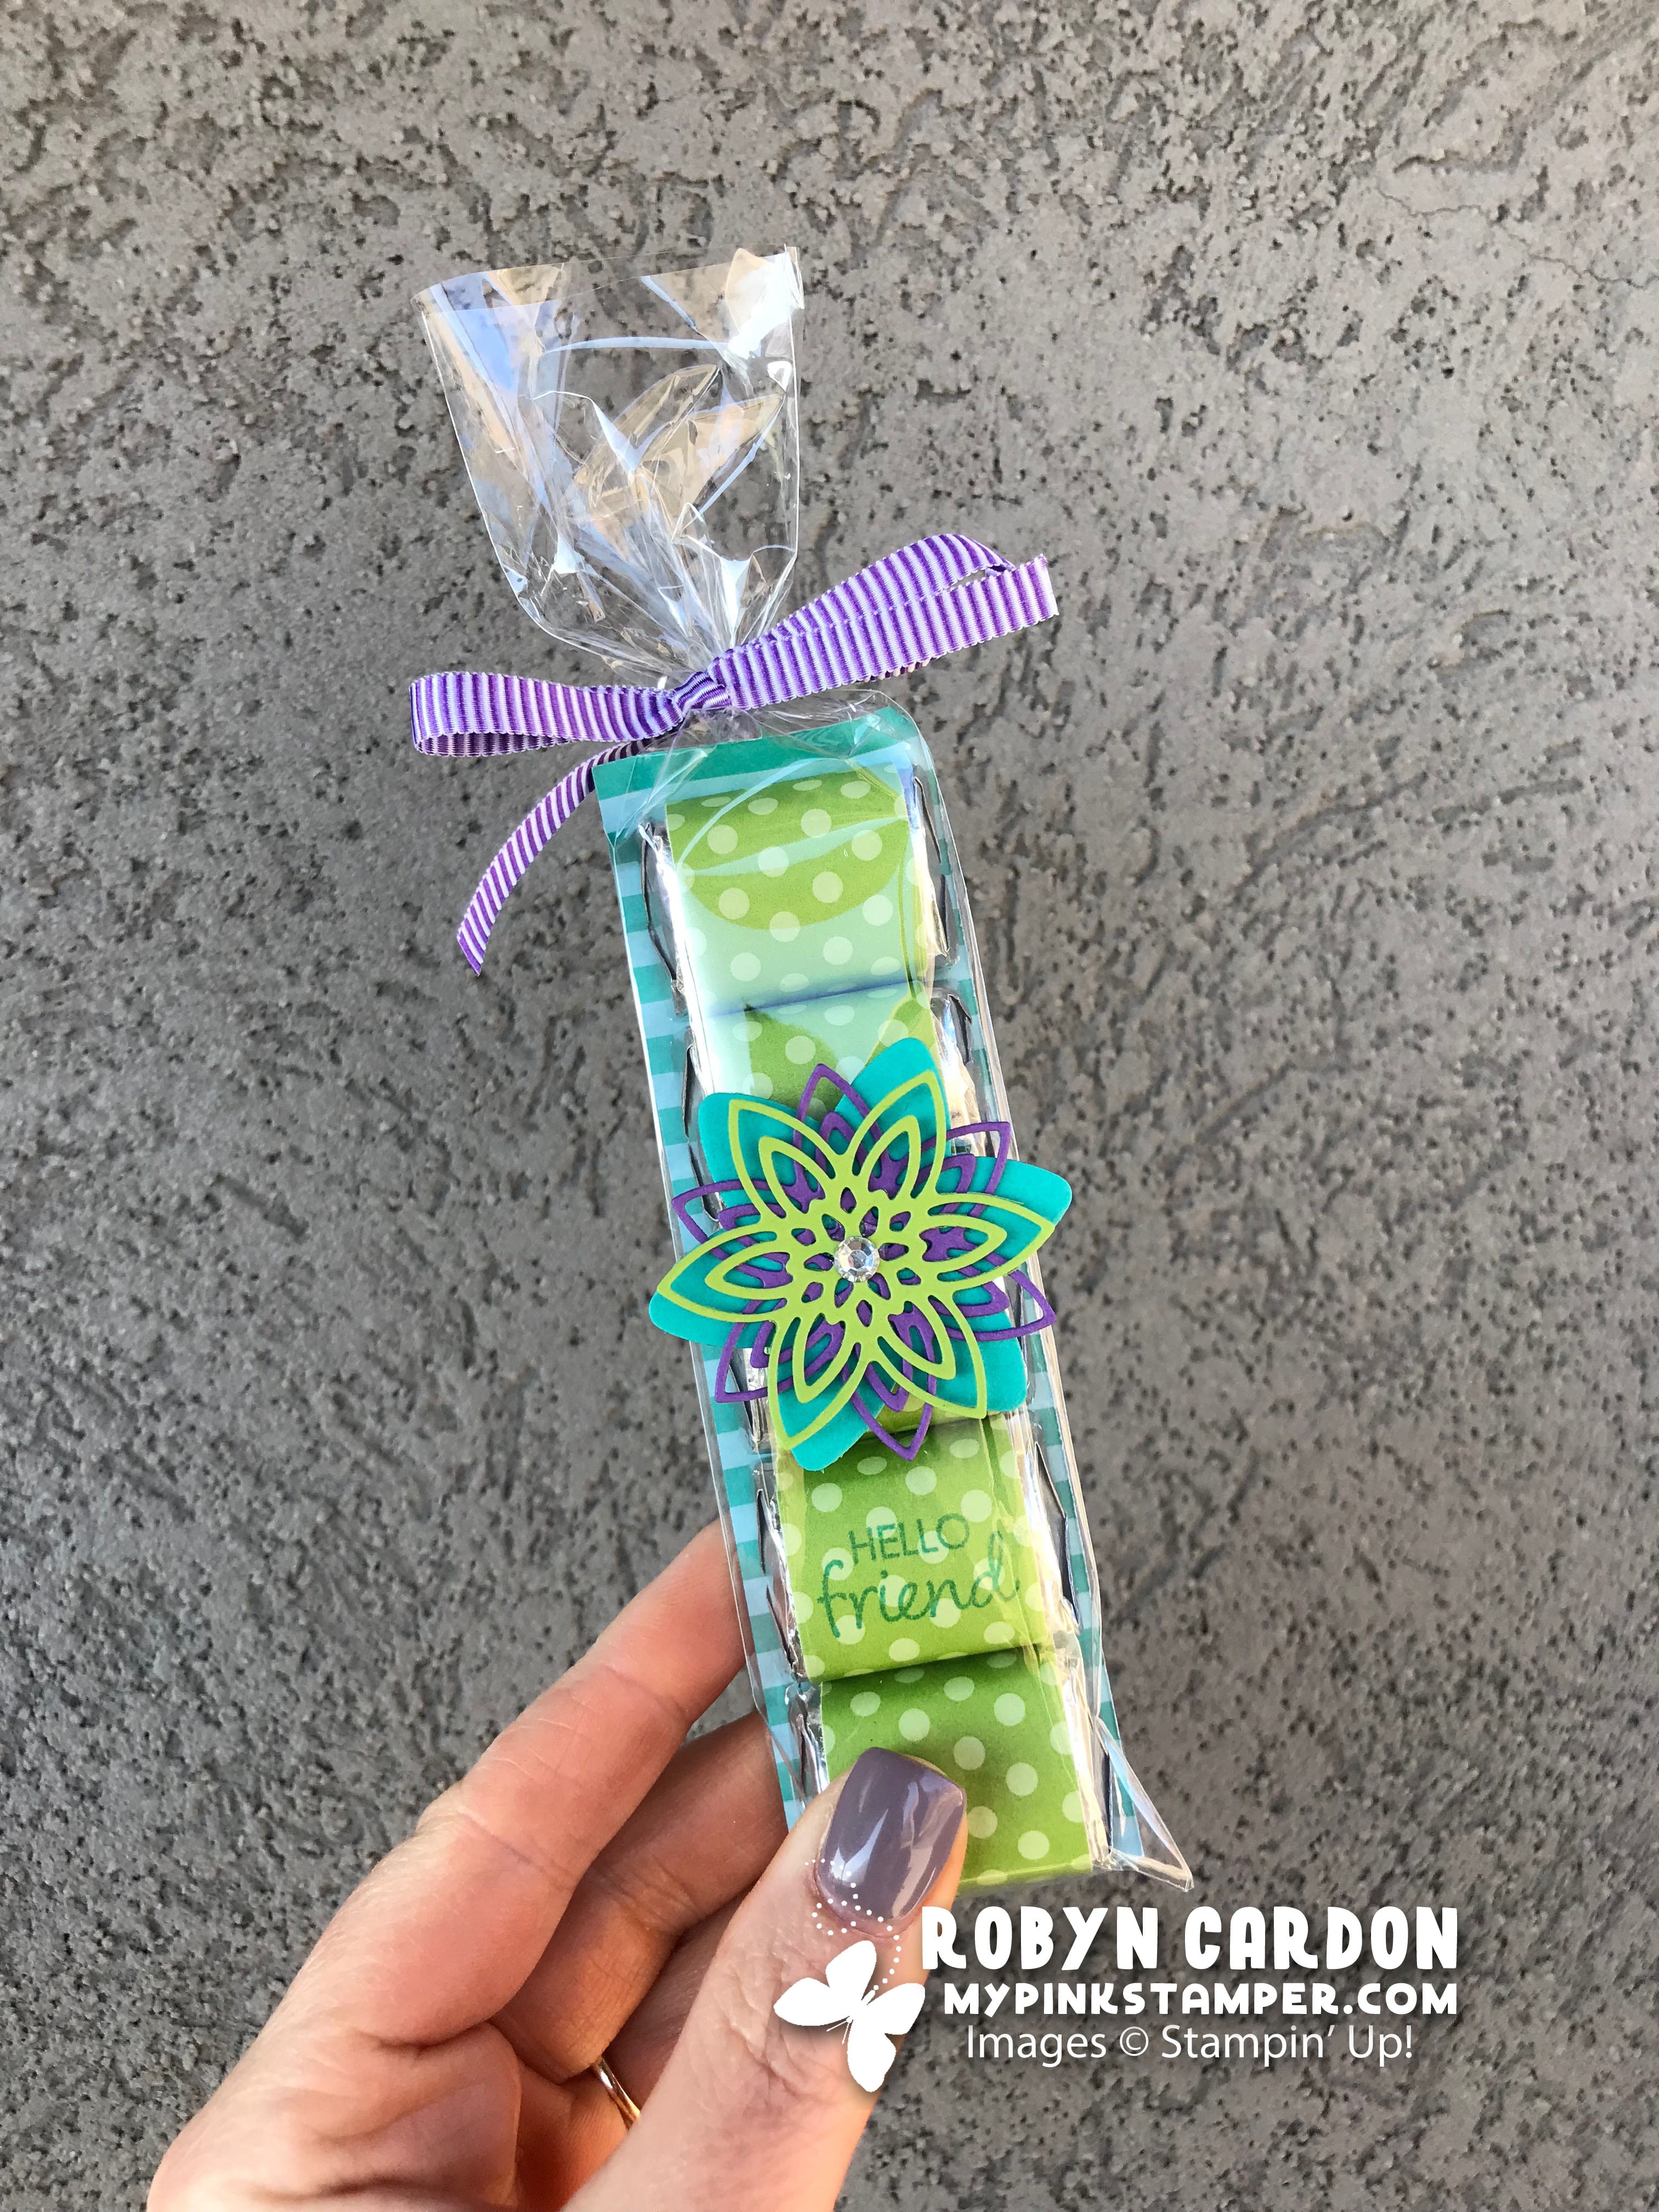 Stampin’ Up! So Hoppy Together Giveaway – Episode 671 – Stampin’ Up! Happiness Surrounds Goodie Bags